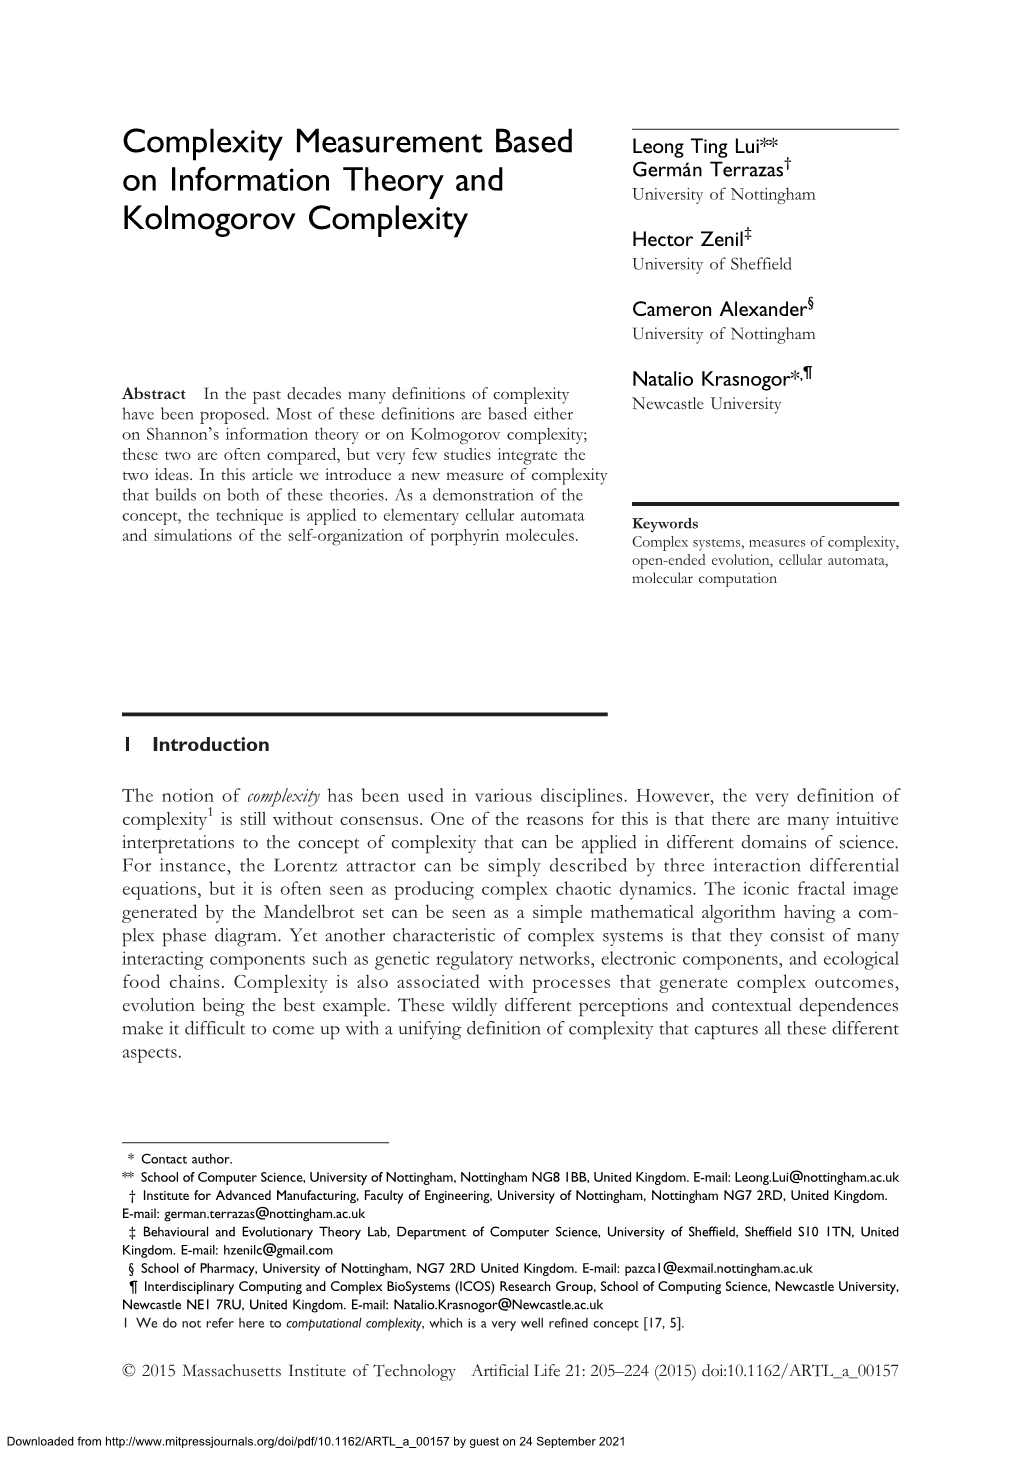 Complexity Measurement Based on Information Theory and Kolmogorov Complexity